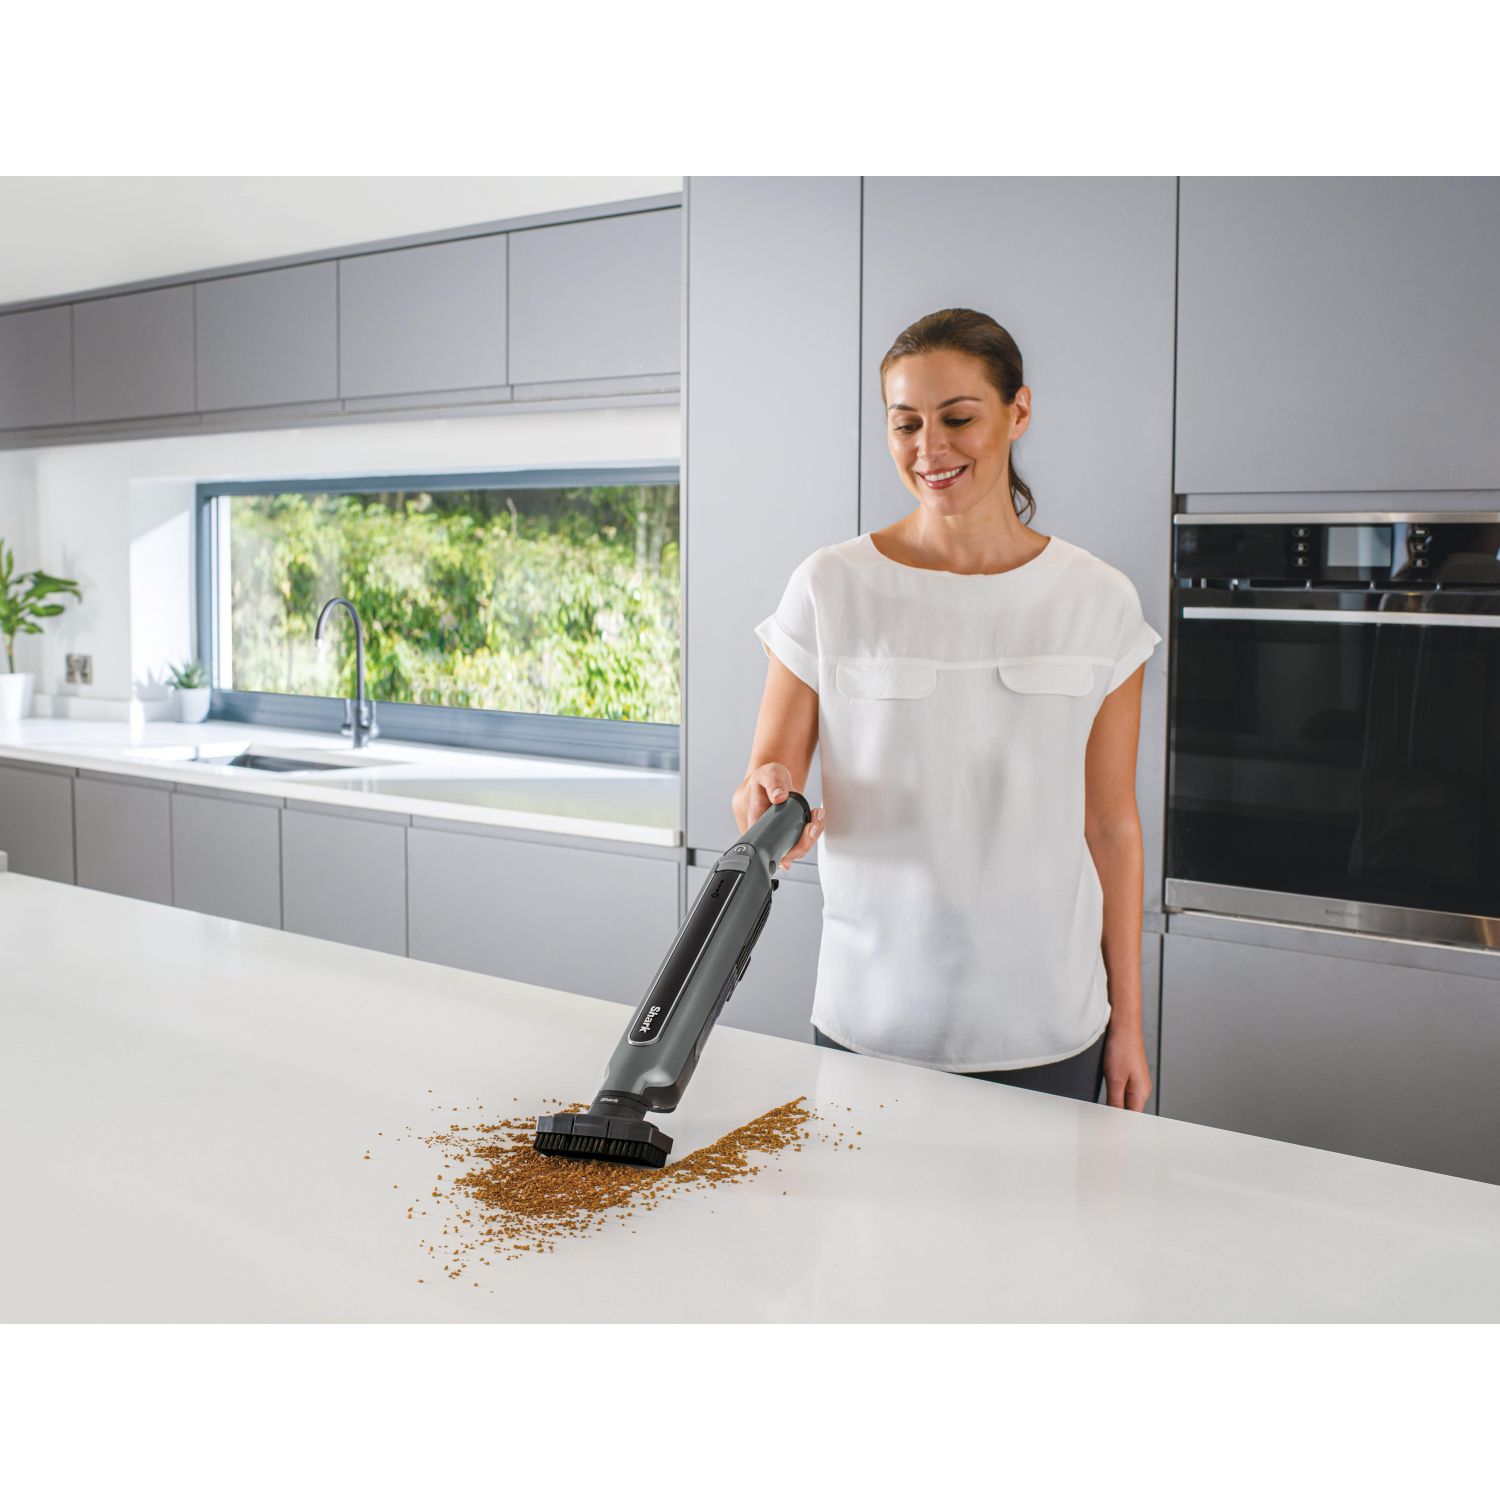 Shark WV361UK Cordless Vacuum Cleaner with Anti Hair Wrap Technology - Run Time 16 Mintues - Steel Grey - 2